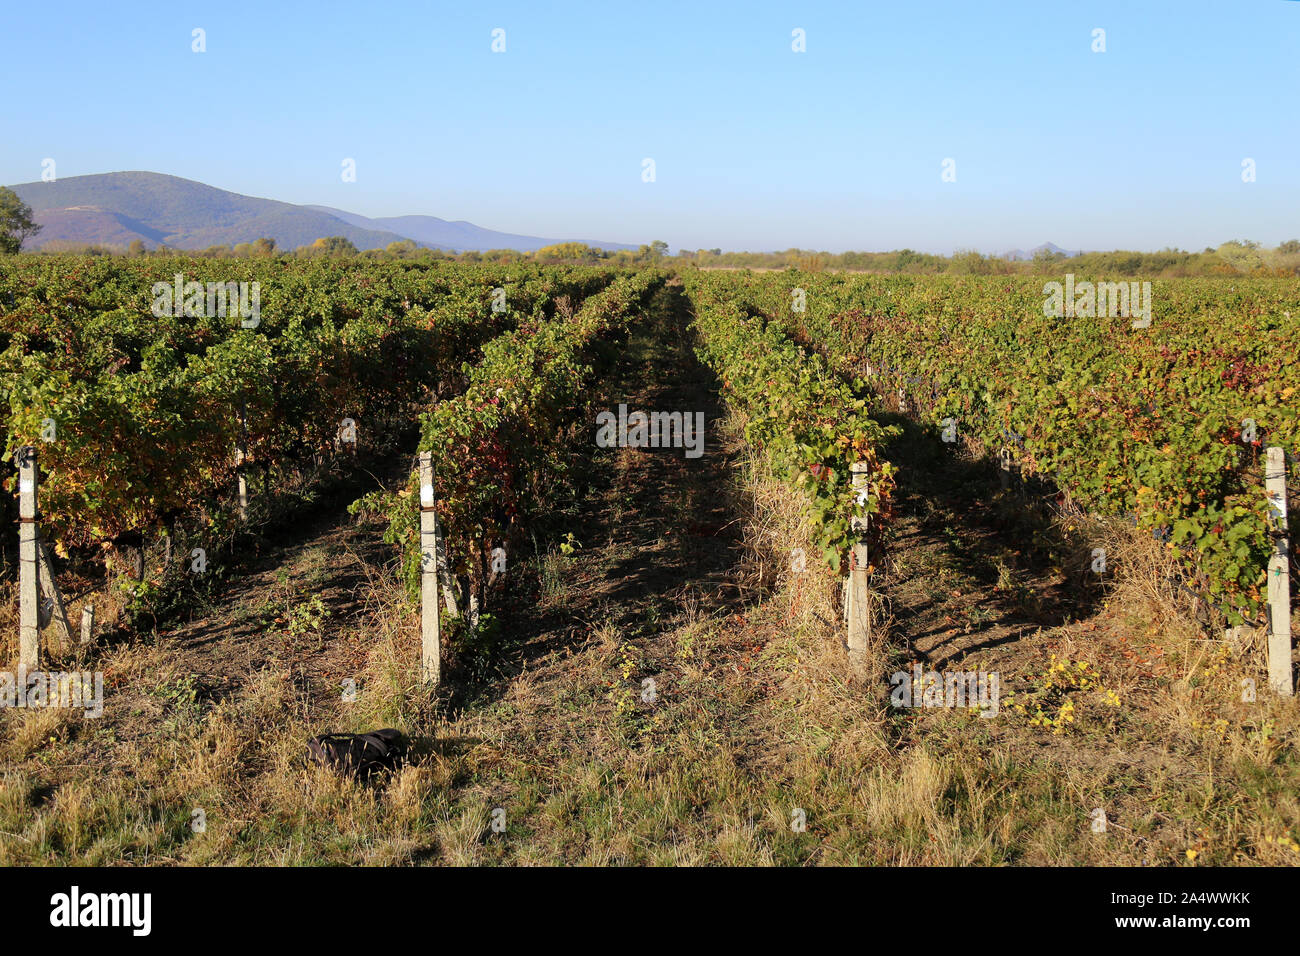 Growing grapes for white and red wine Stock Photo